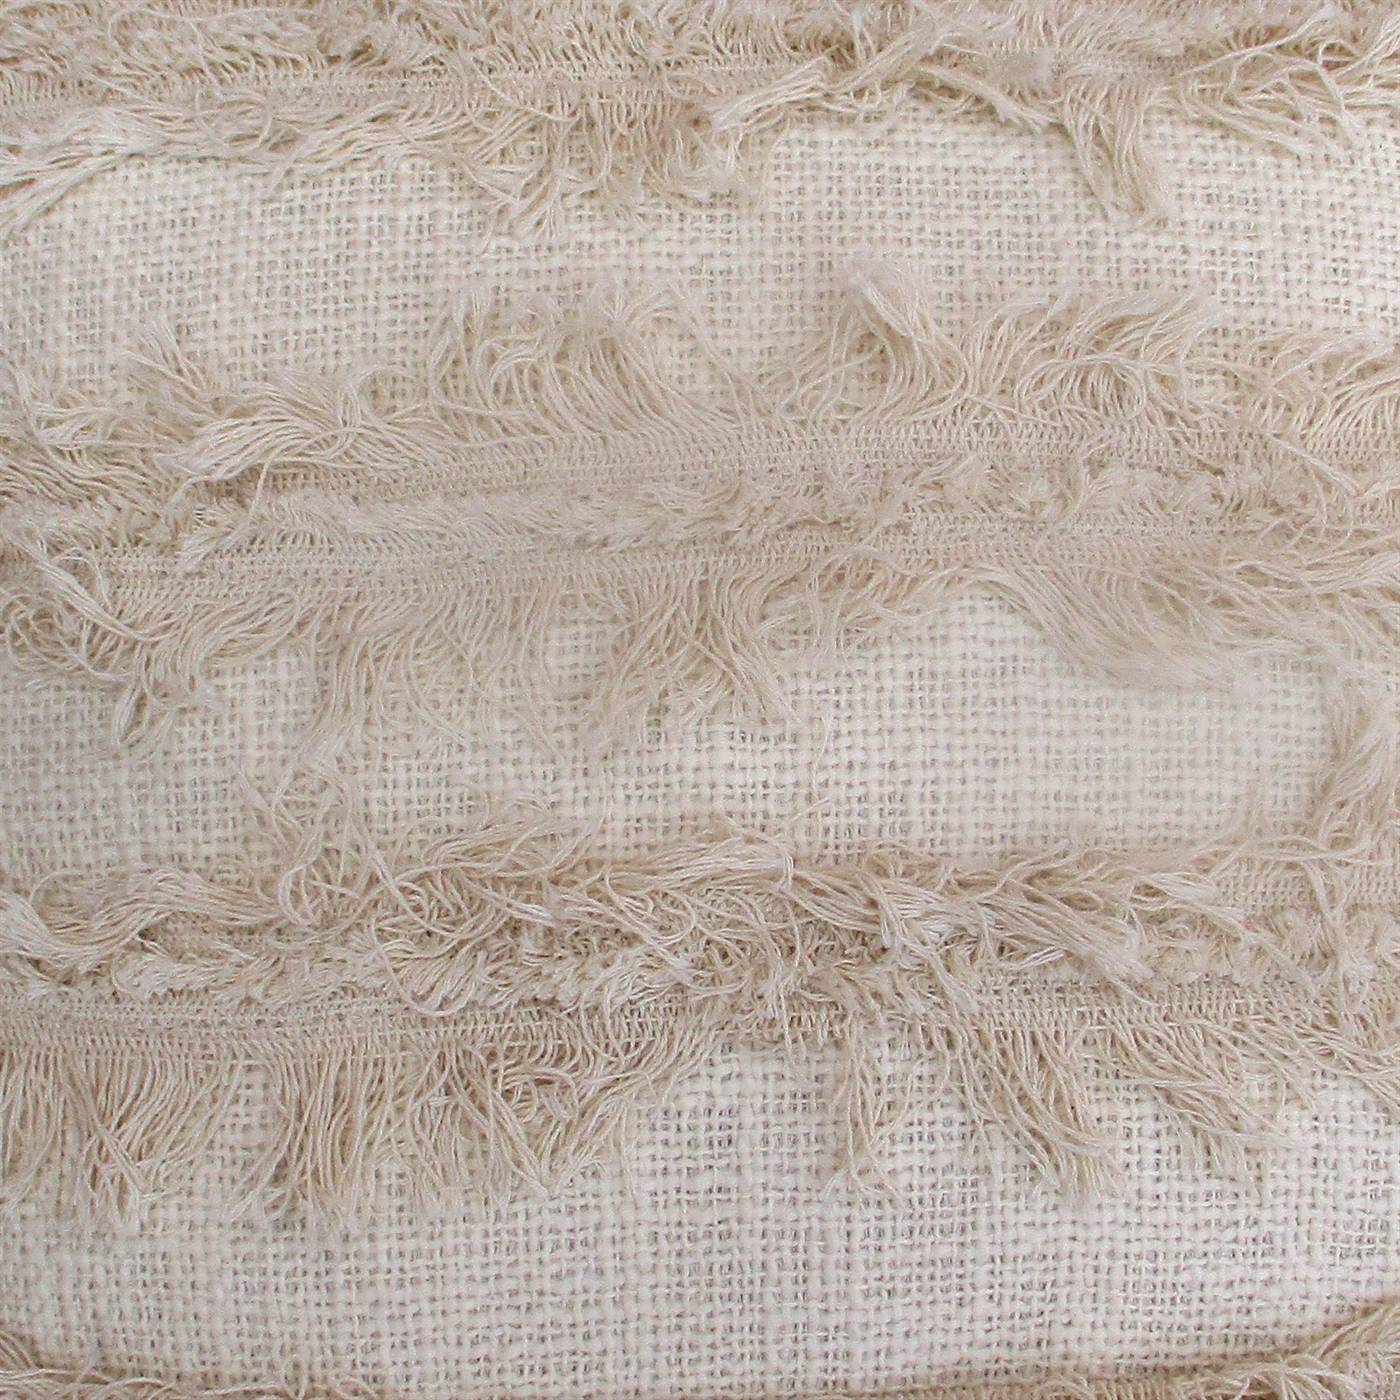 Kellia Cushion, 45x45 cm, Natural White, Cotton, Polyester, Hand Made, Hm Stitching, Flat Weave